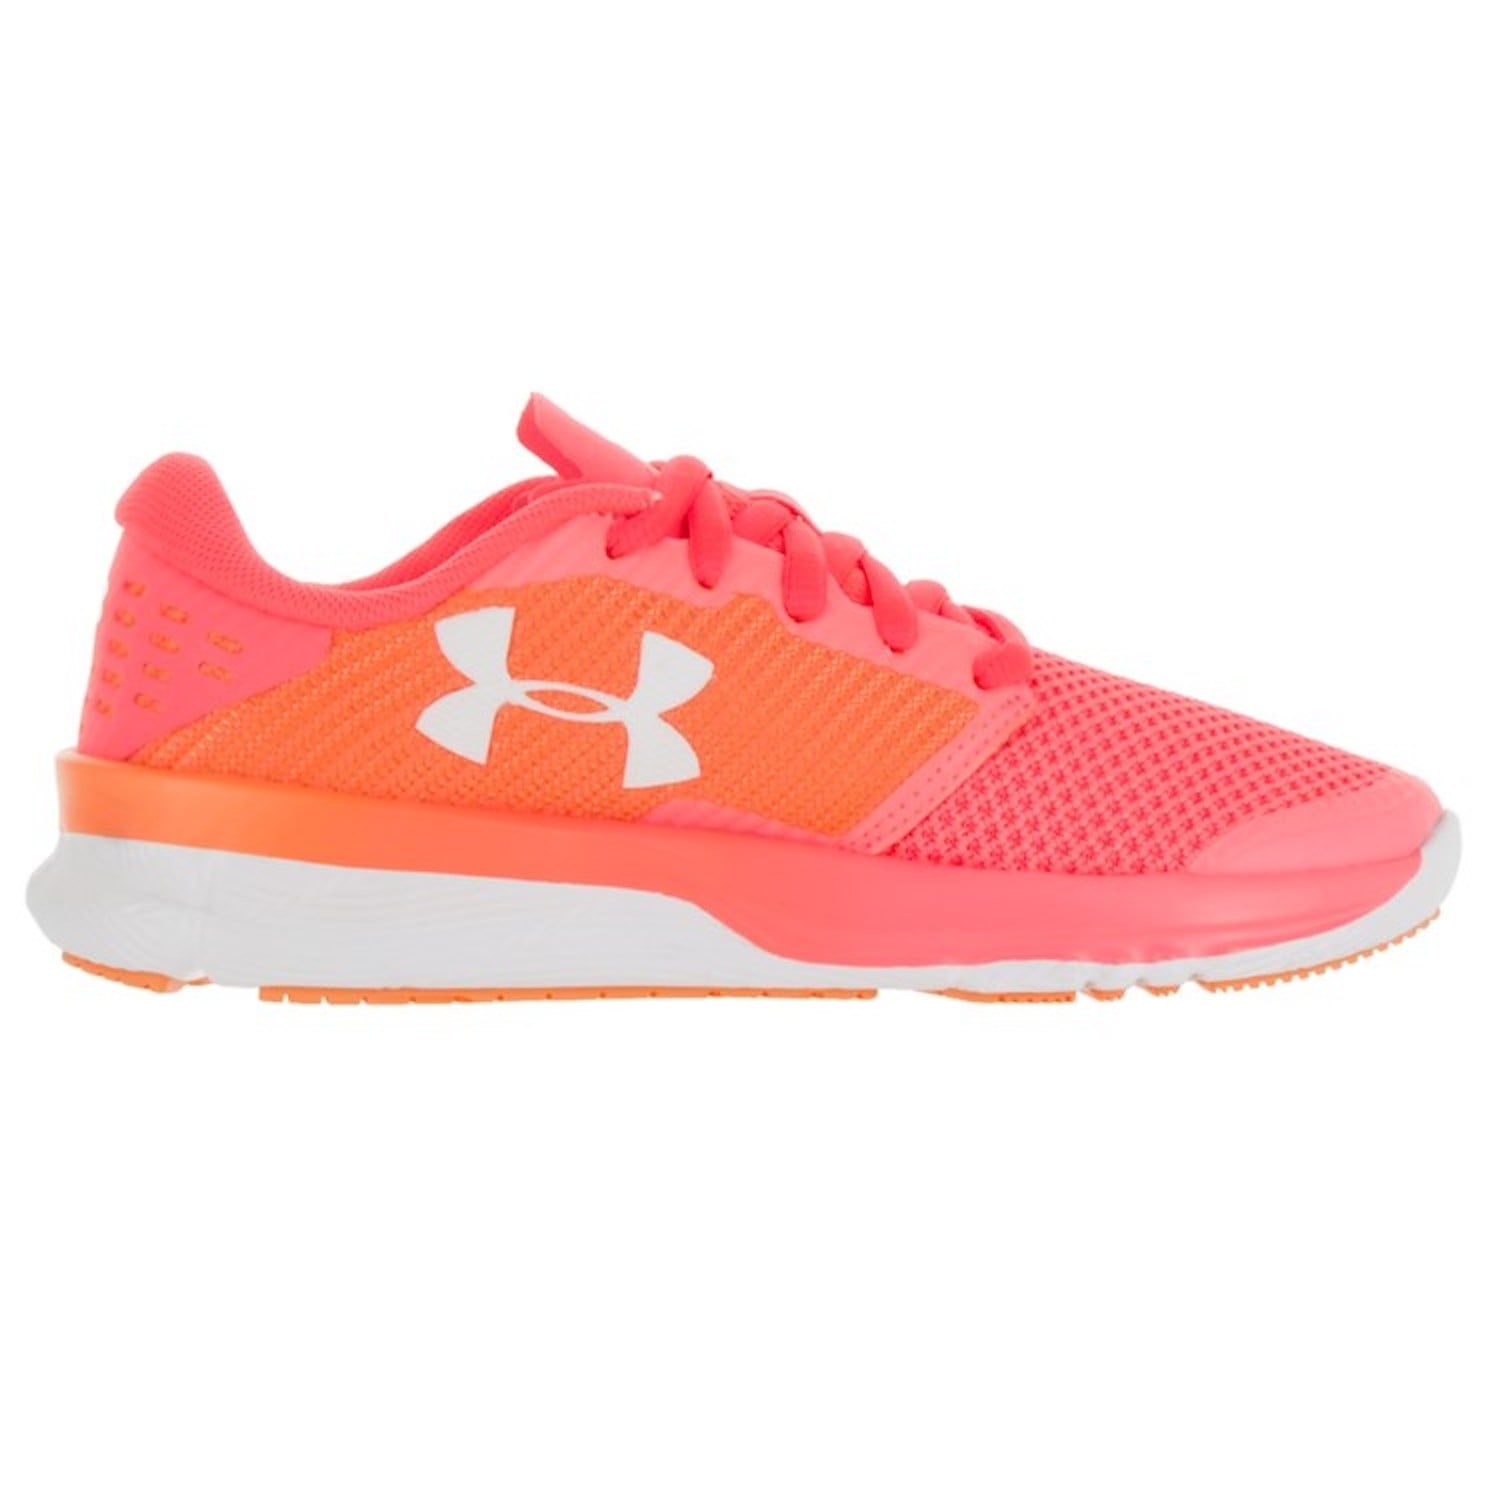 best under armour shoes for working out